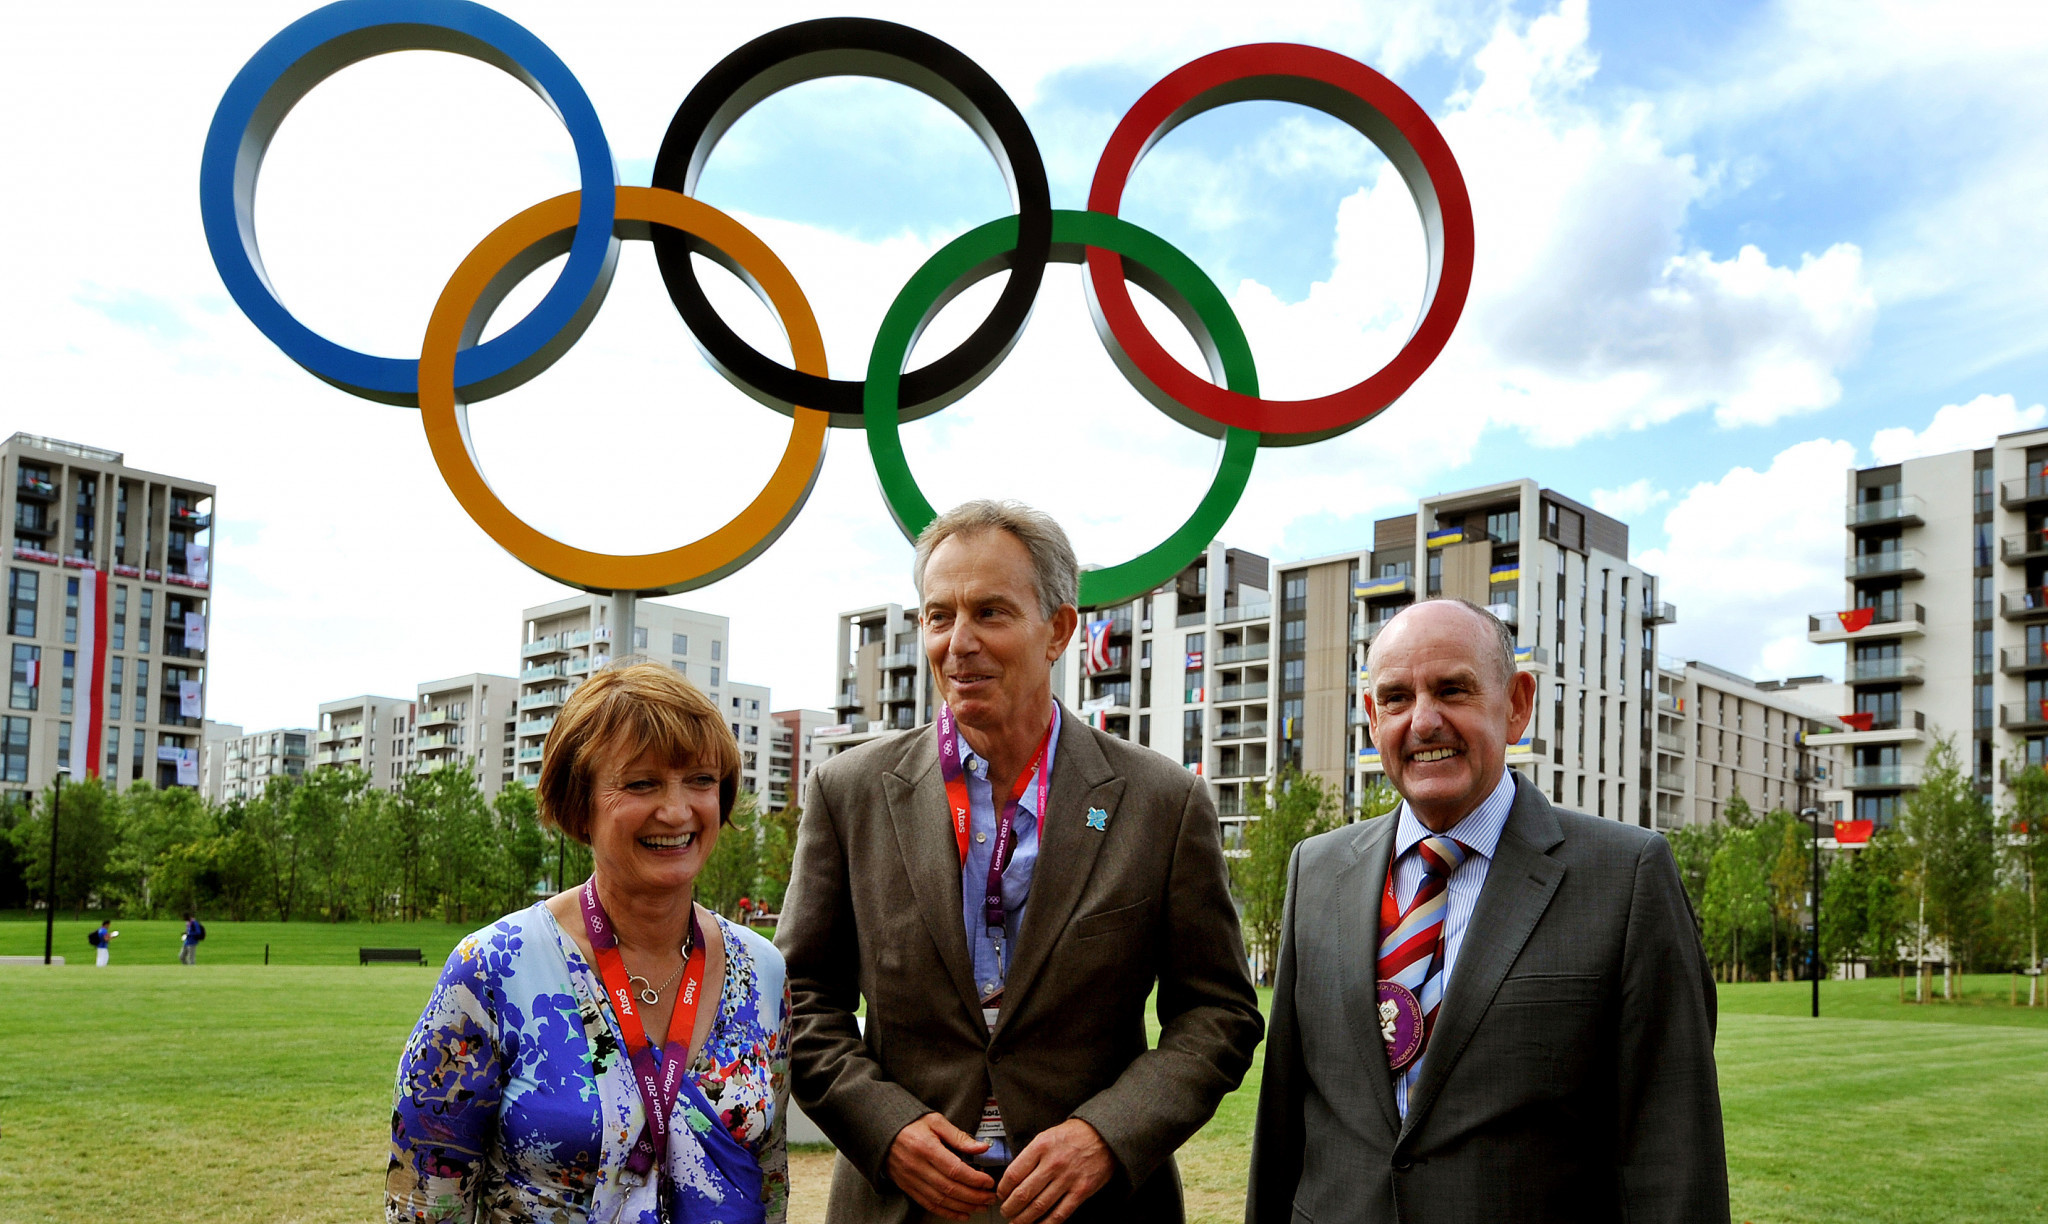 Dame Tessa Jowell, pictured here with former British Prime Minister Tony Blair and London 2012 Olympic Village Mayor Sir Charles Allen, helped bring the 2012 Olympic Games to London ©Getty Images